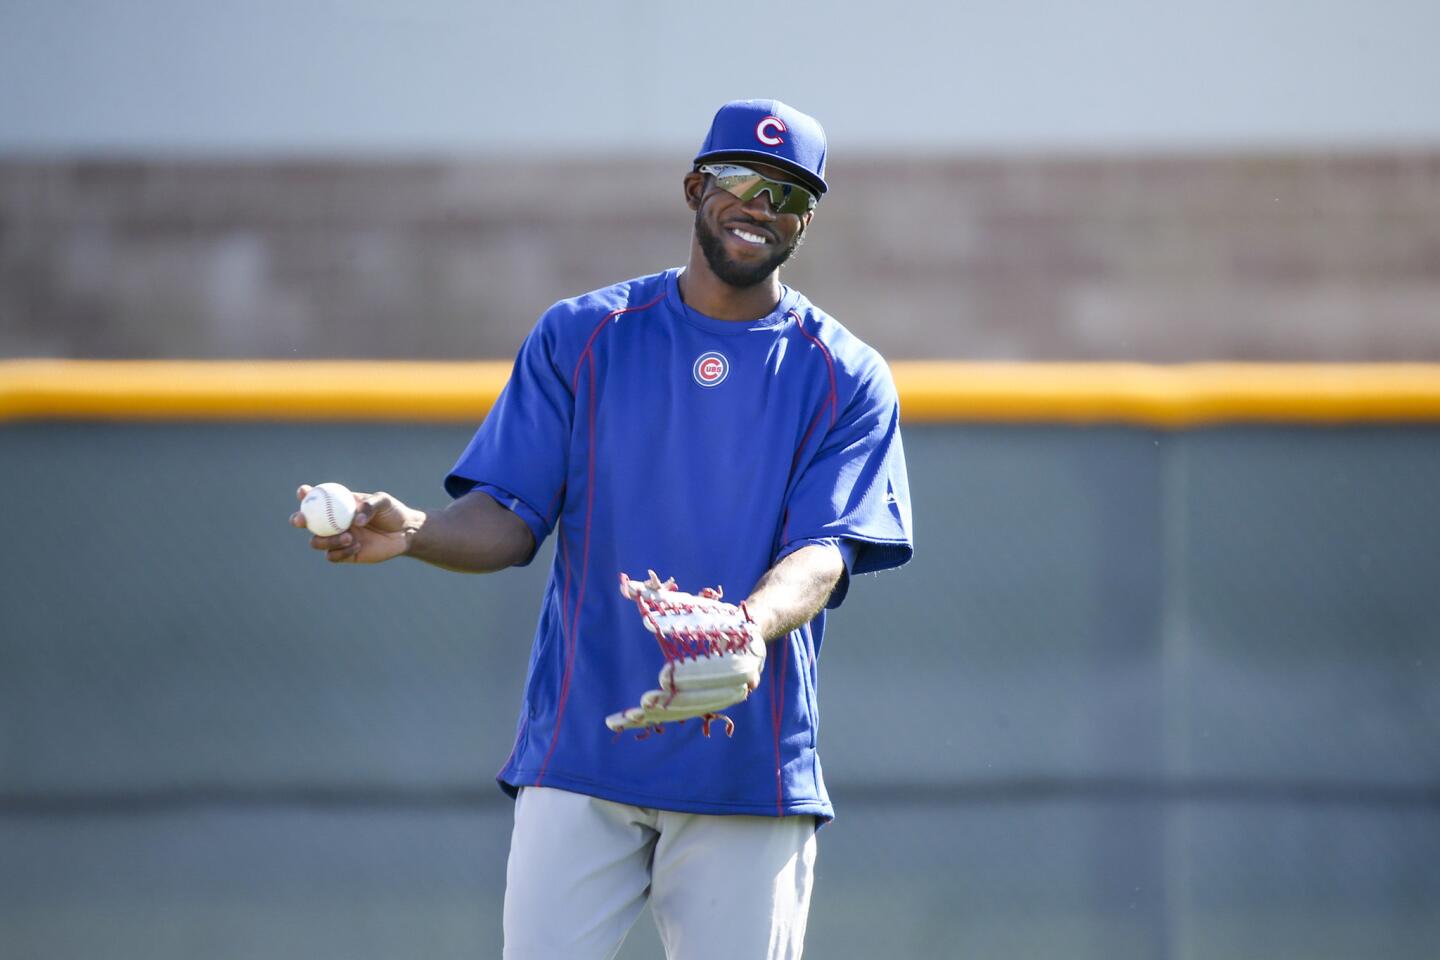 Dexter Fowler attends practice during spring training at Sloan Park Friday, Feb. 26, 2016, in Mesa, Ariz.